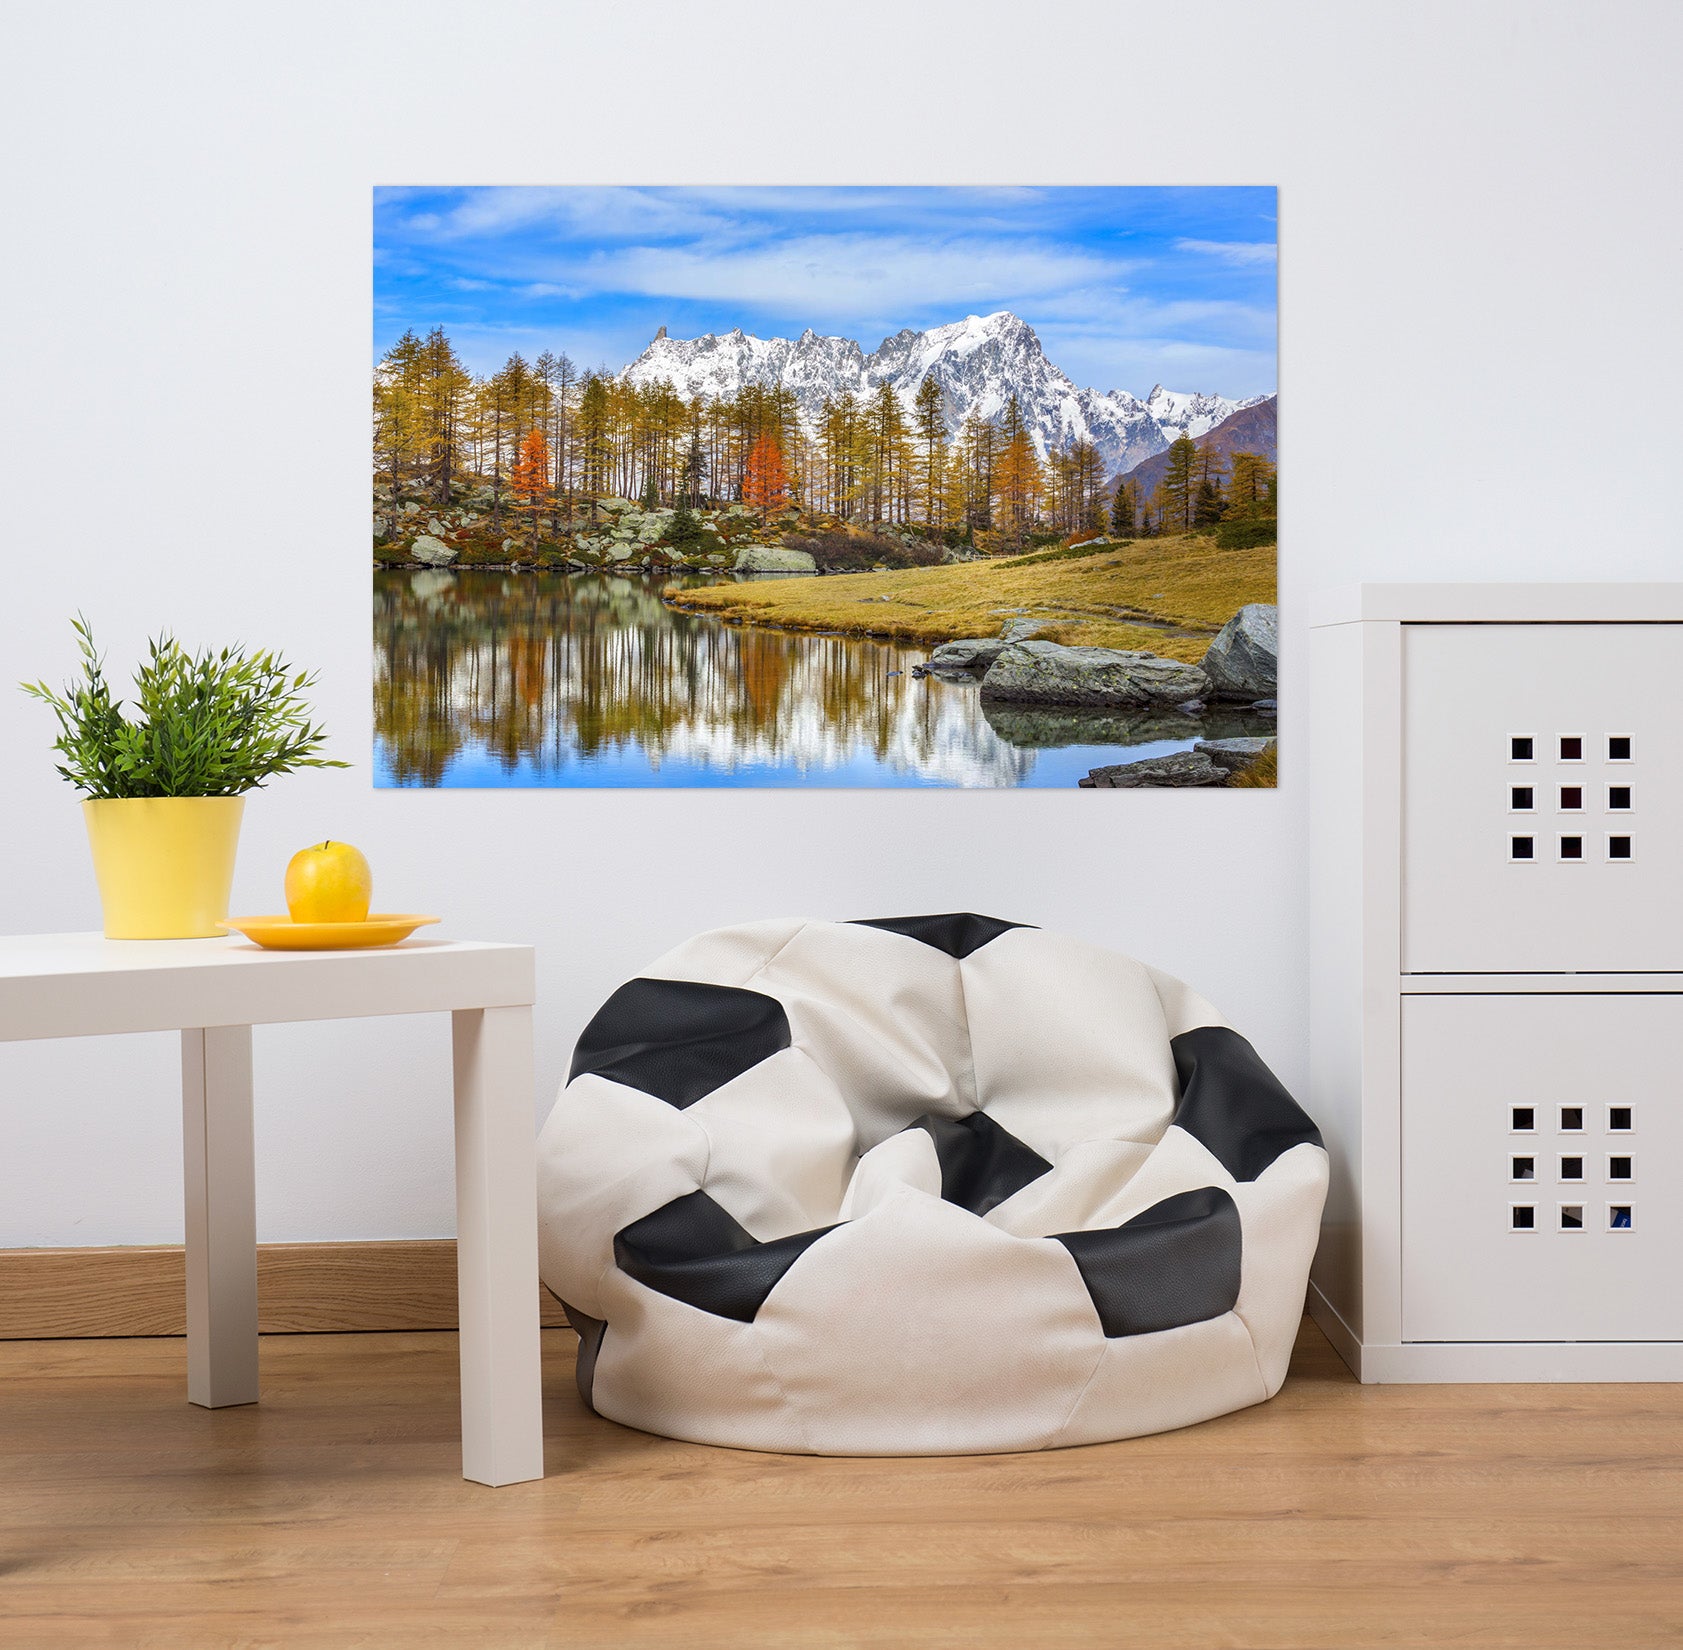 3D Valley Lake 182 Marco Carmassi Wall Sticker